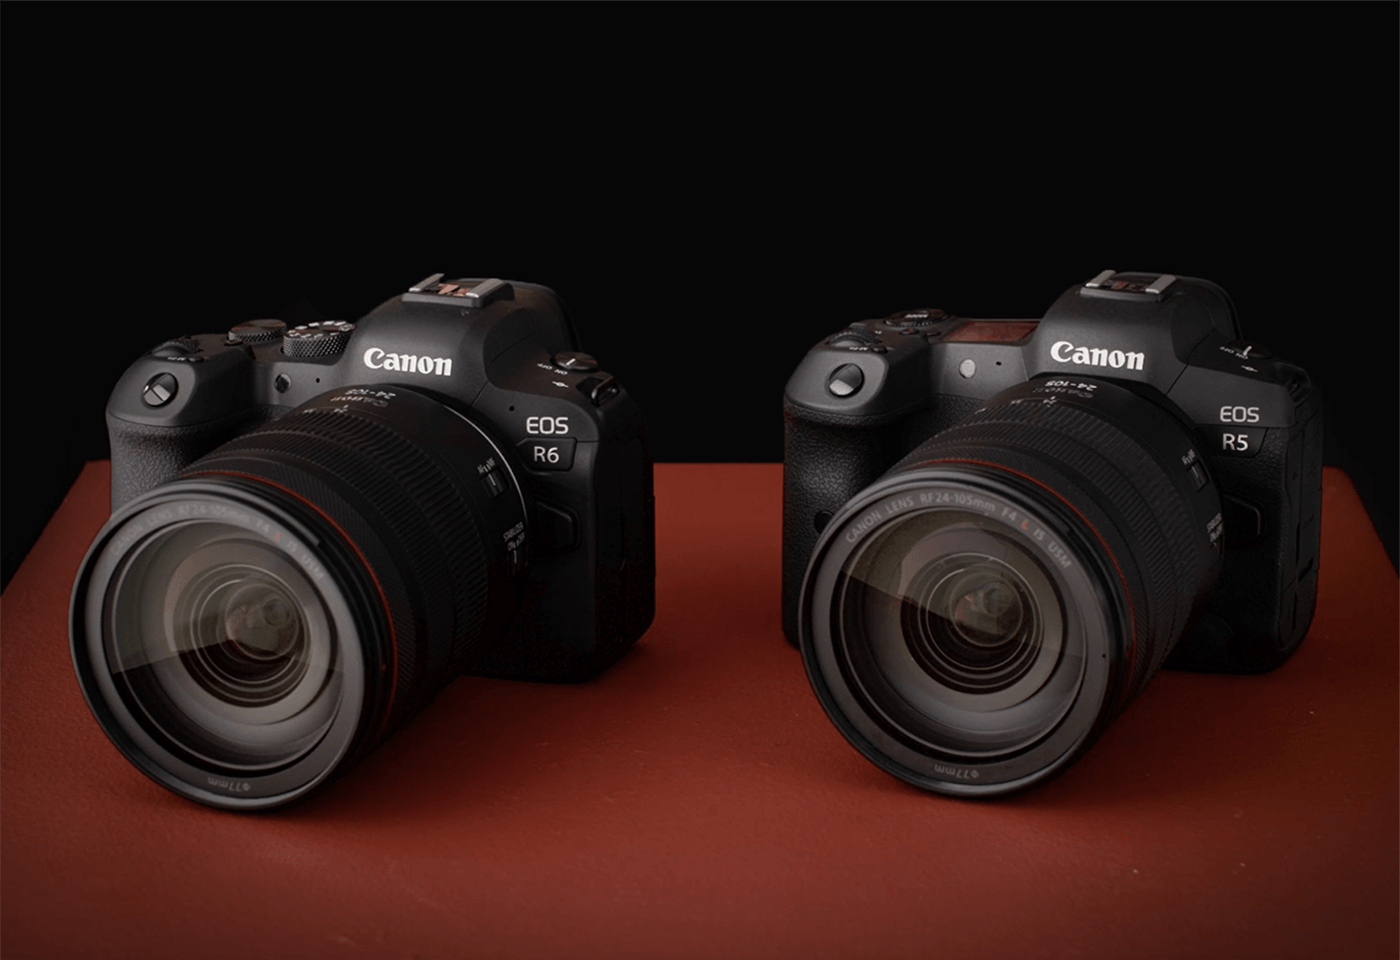 EOS R5 and EOS R6